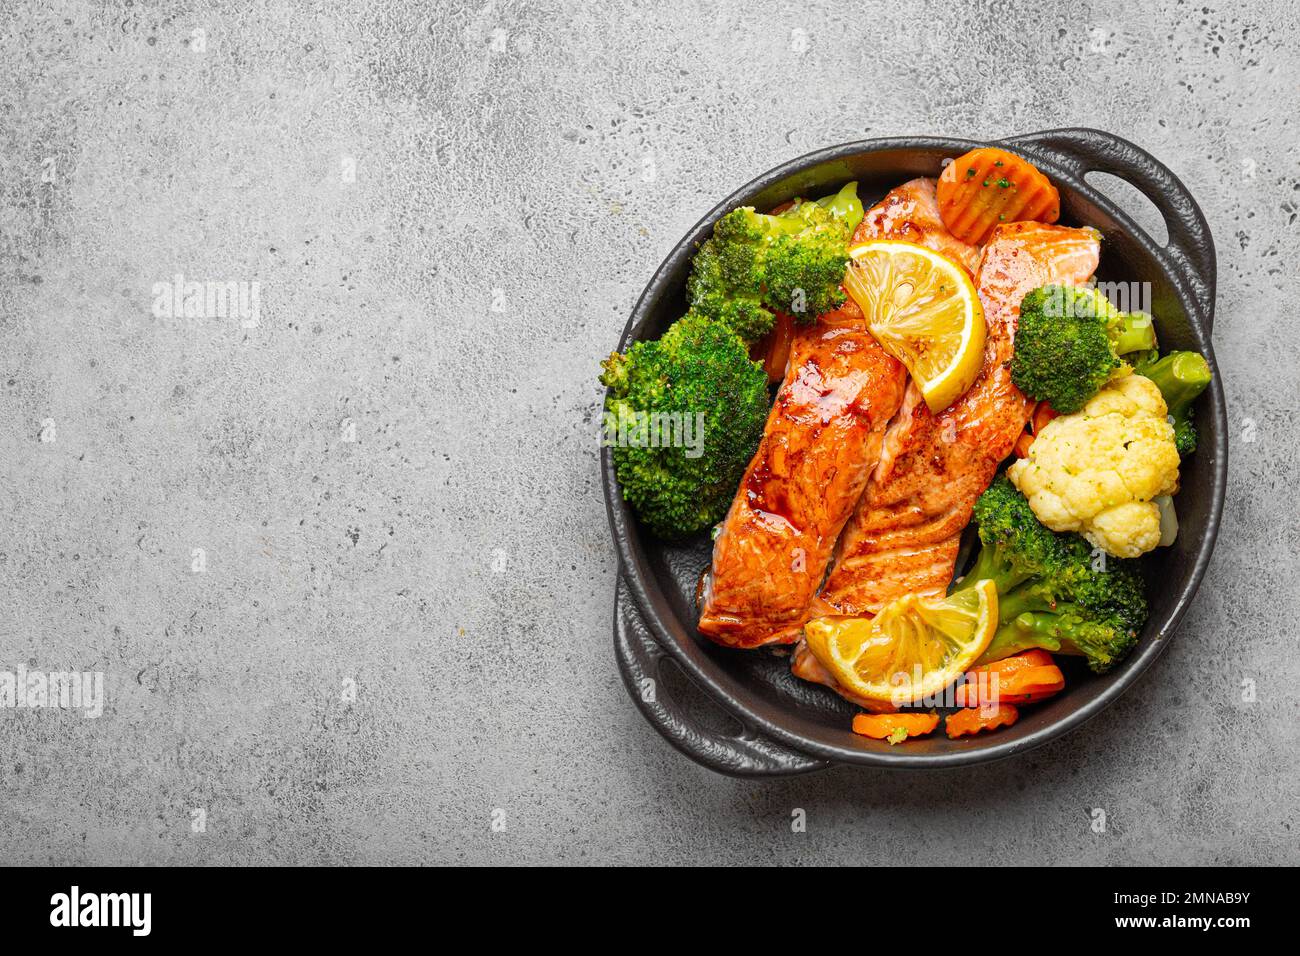 Healthy baked fish salmon steaks, broccoli, cauliflower, carrot in black cast iron casserole bowl on grey stone background. Cooking a delicious low Stock Photo